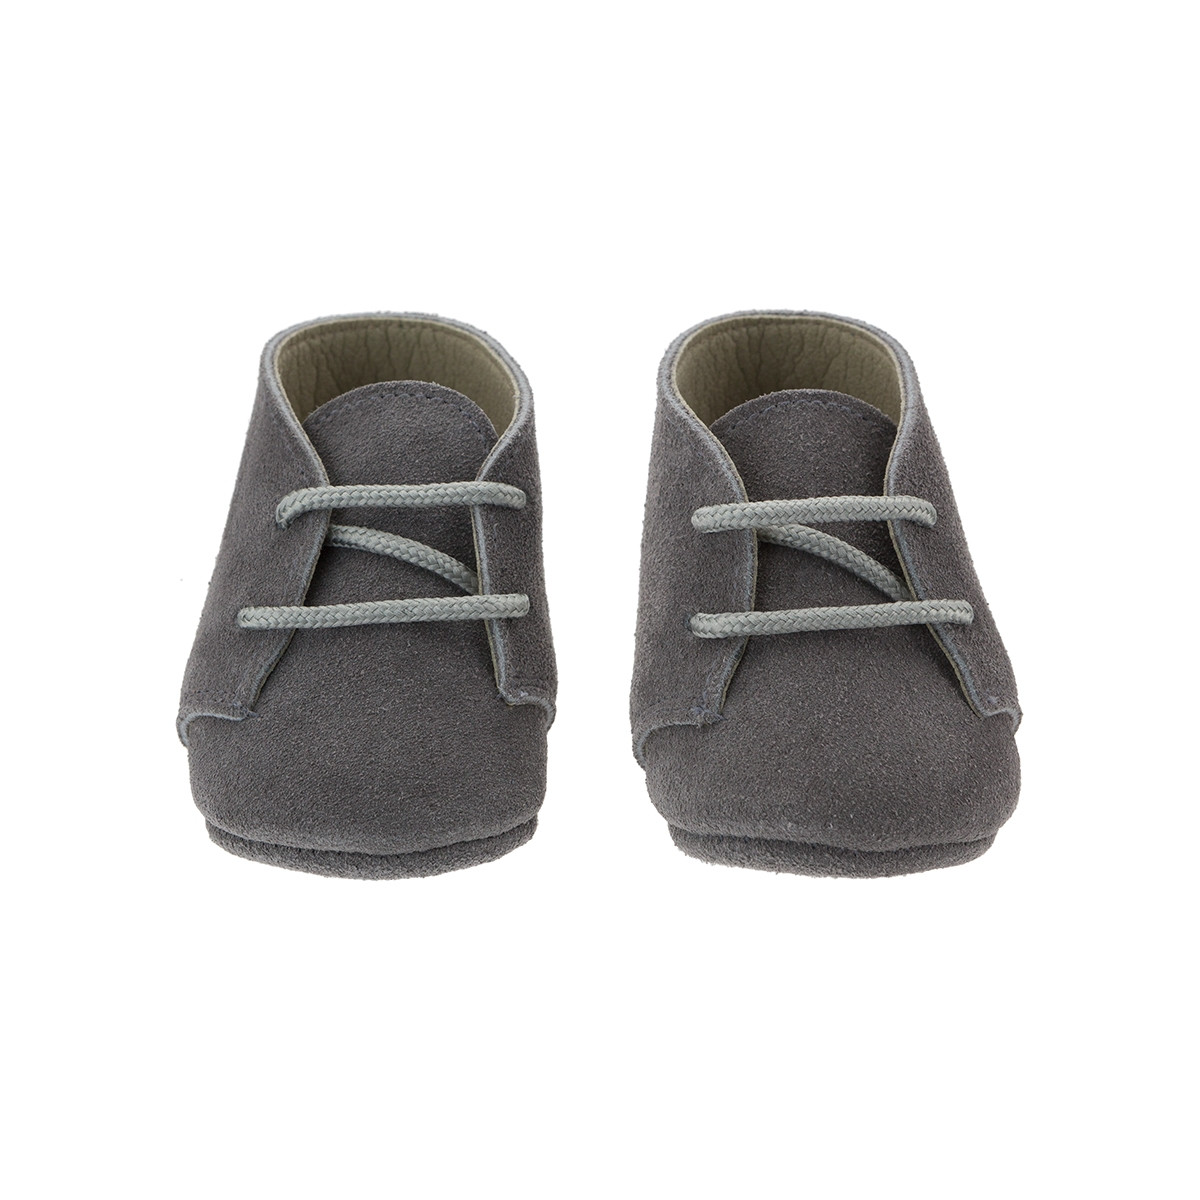 WINTER BABY SHOES MOD.605 GREY CAMBRASS - 4